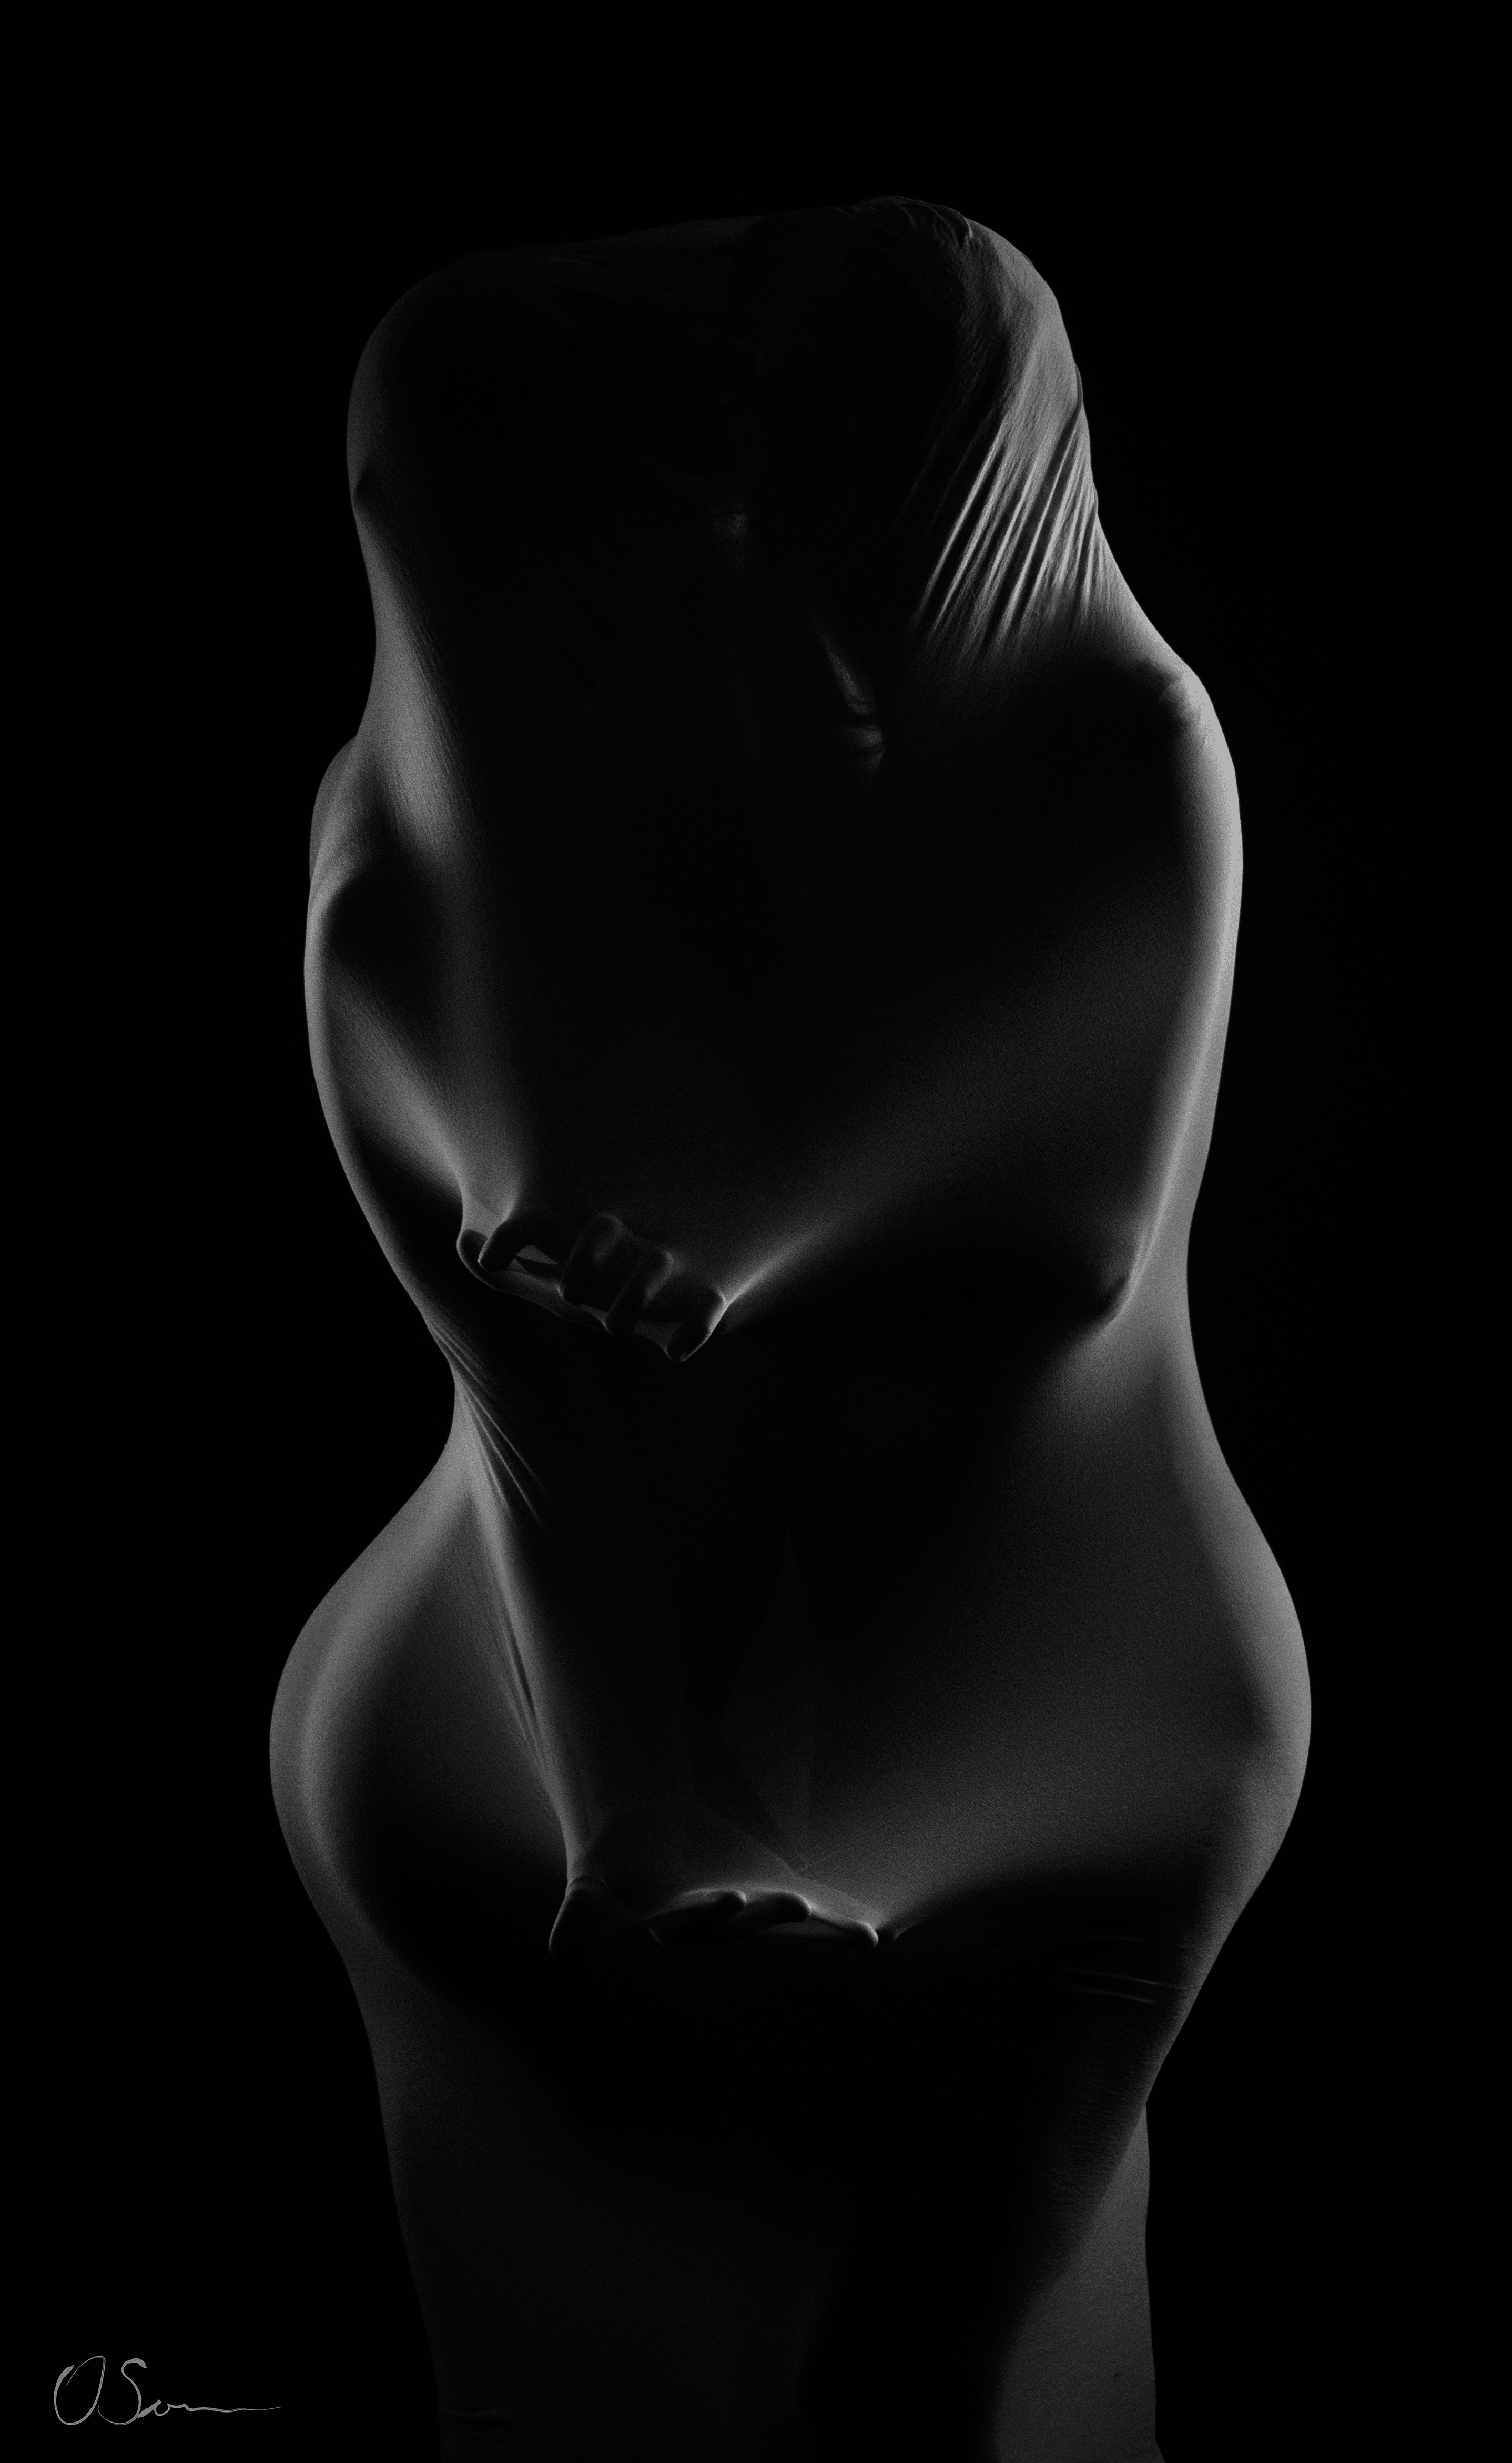 Now me is us | nude art photography